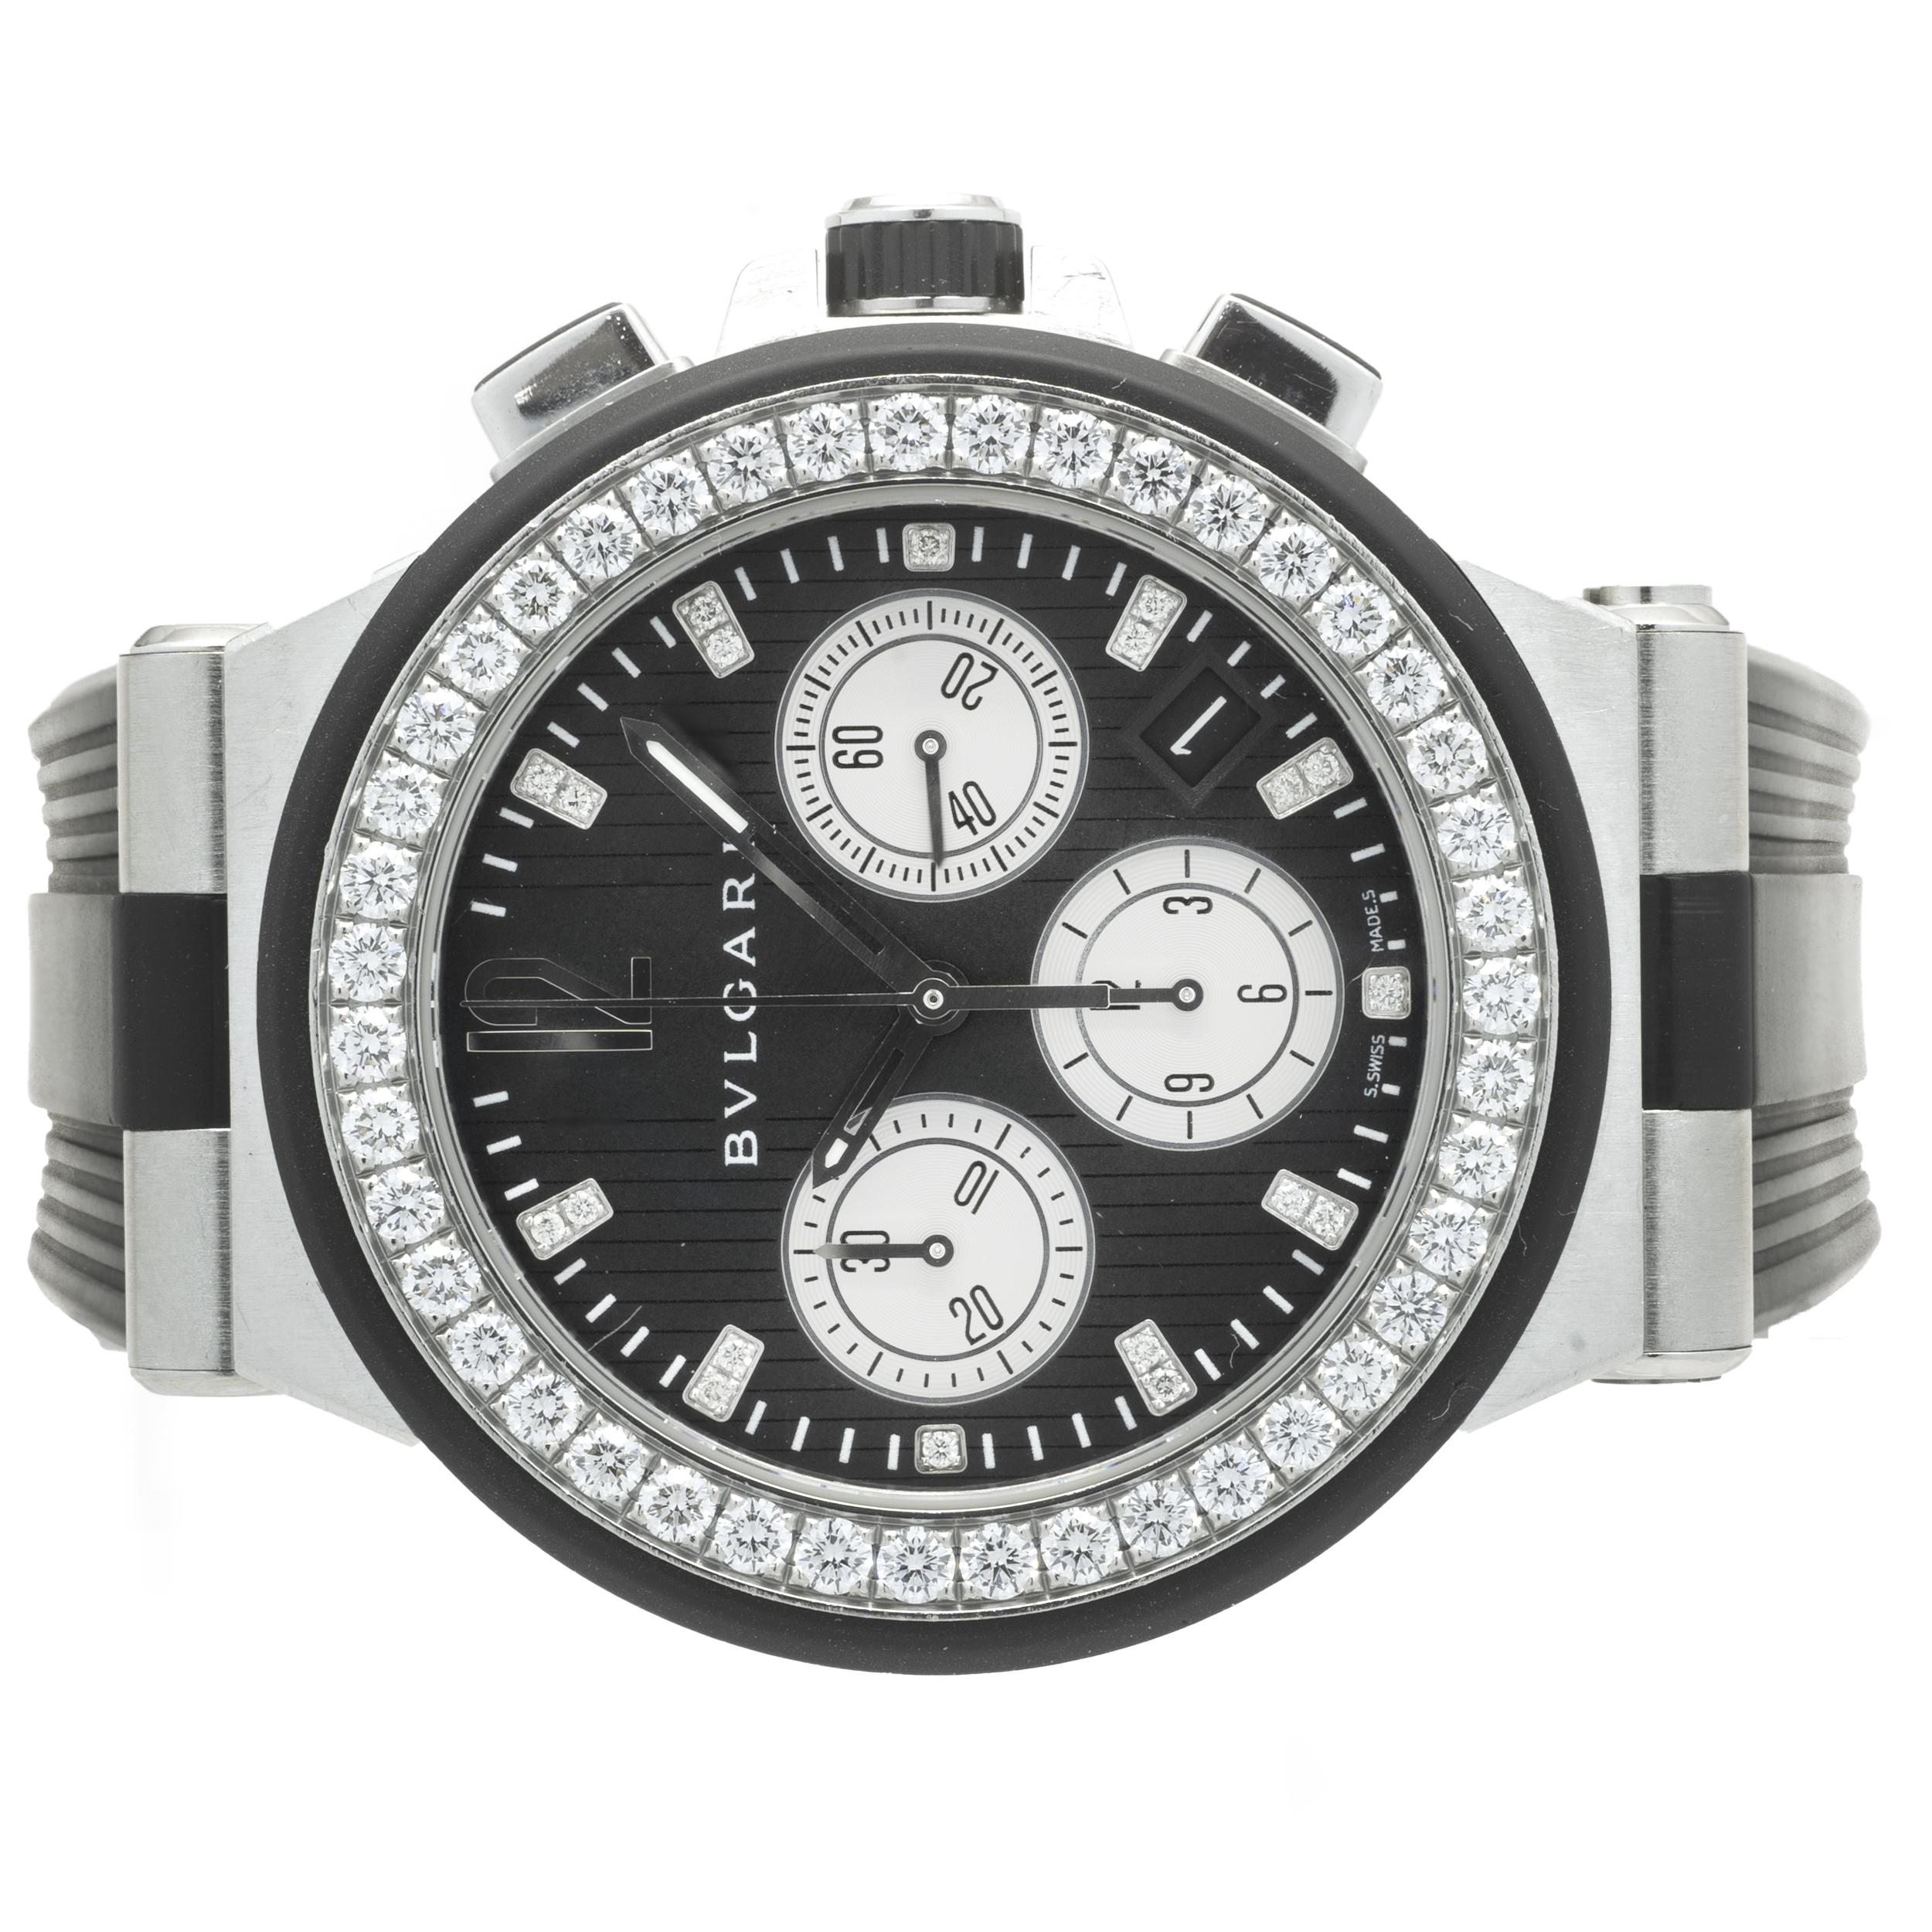 Movement: automatic
Function: hours, minutes, seconds, date, chronograph
Case: 40mm round case, factory diamond bezel 
Band: black rubber strap, buckle clasp
Dial: black chrono dial, diamond markers
Serial #: L0XXX
Reference #: DG40SCCH

No box or